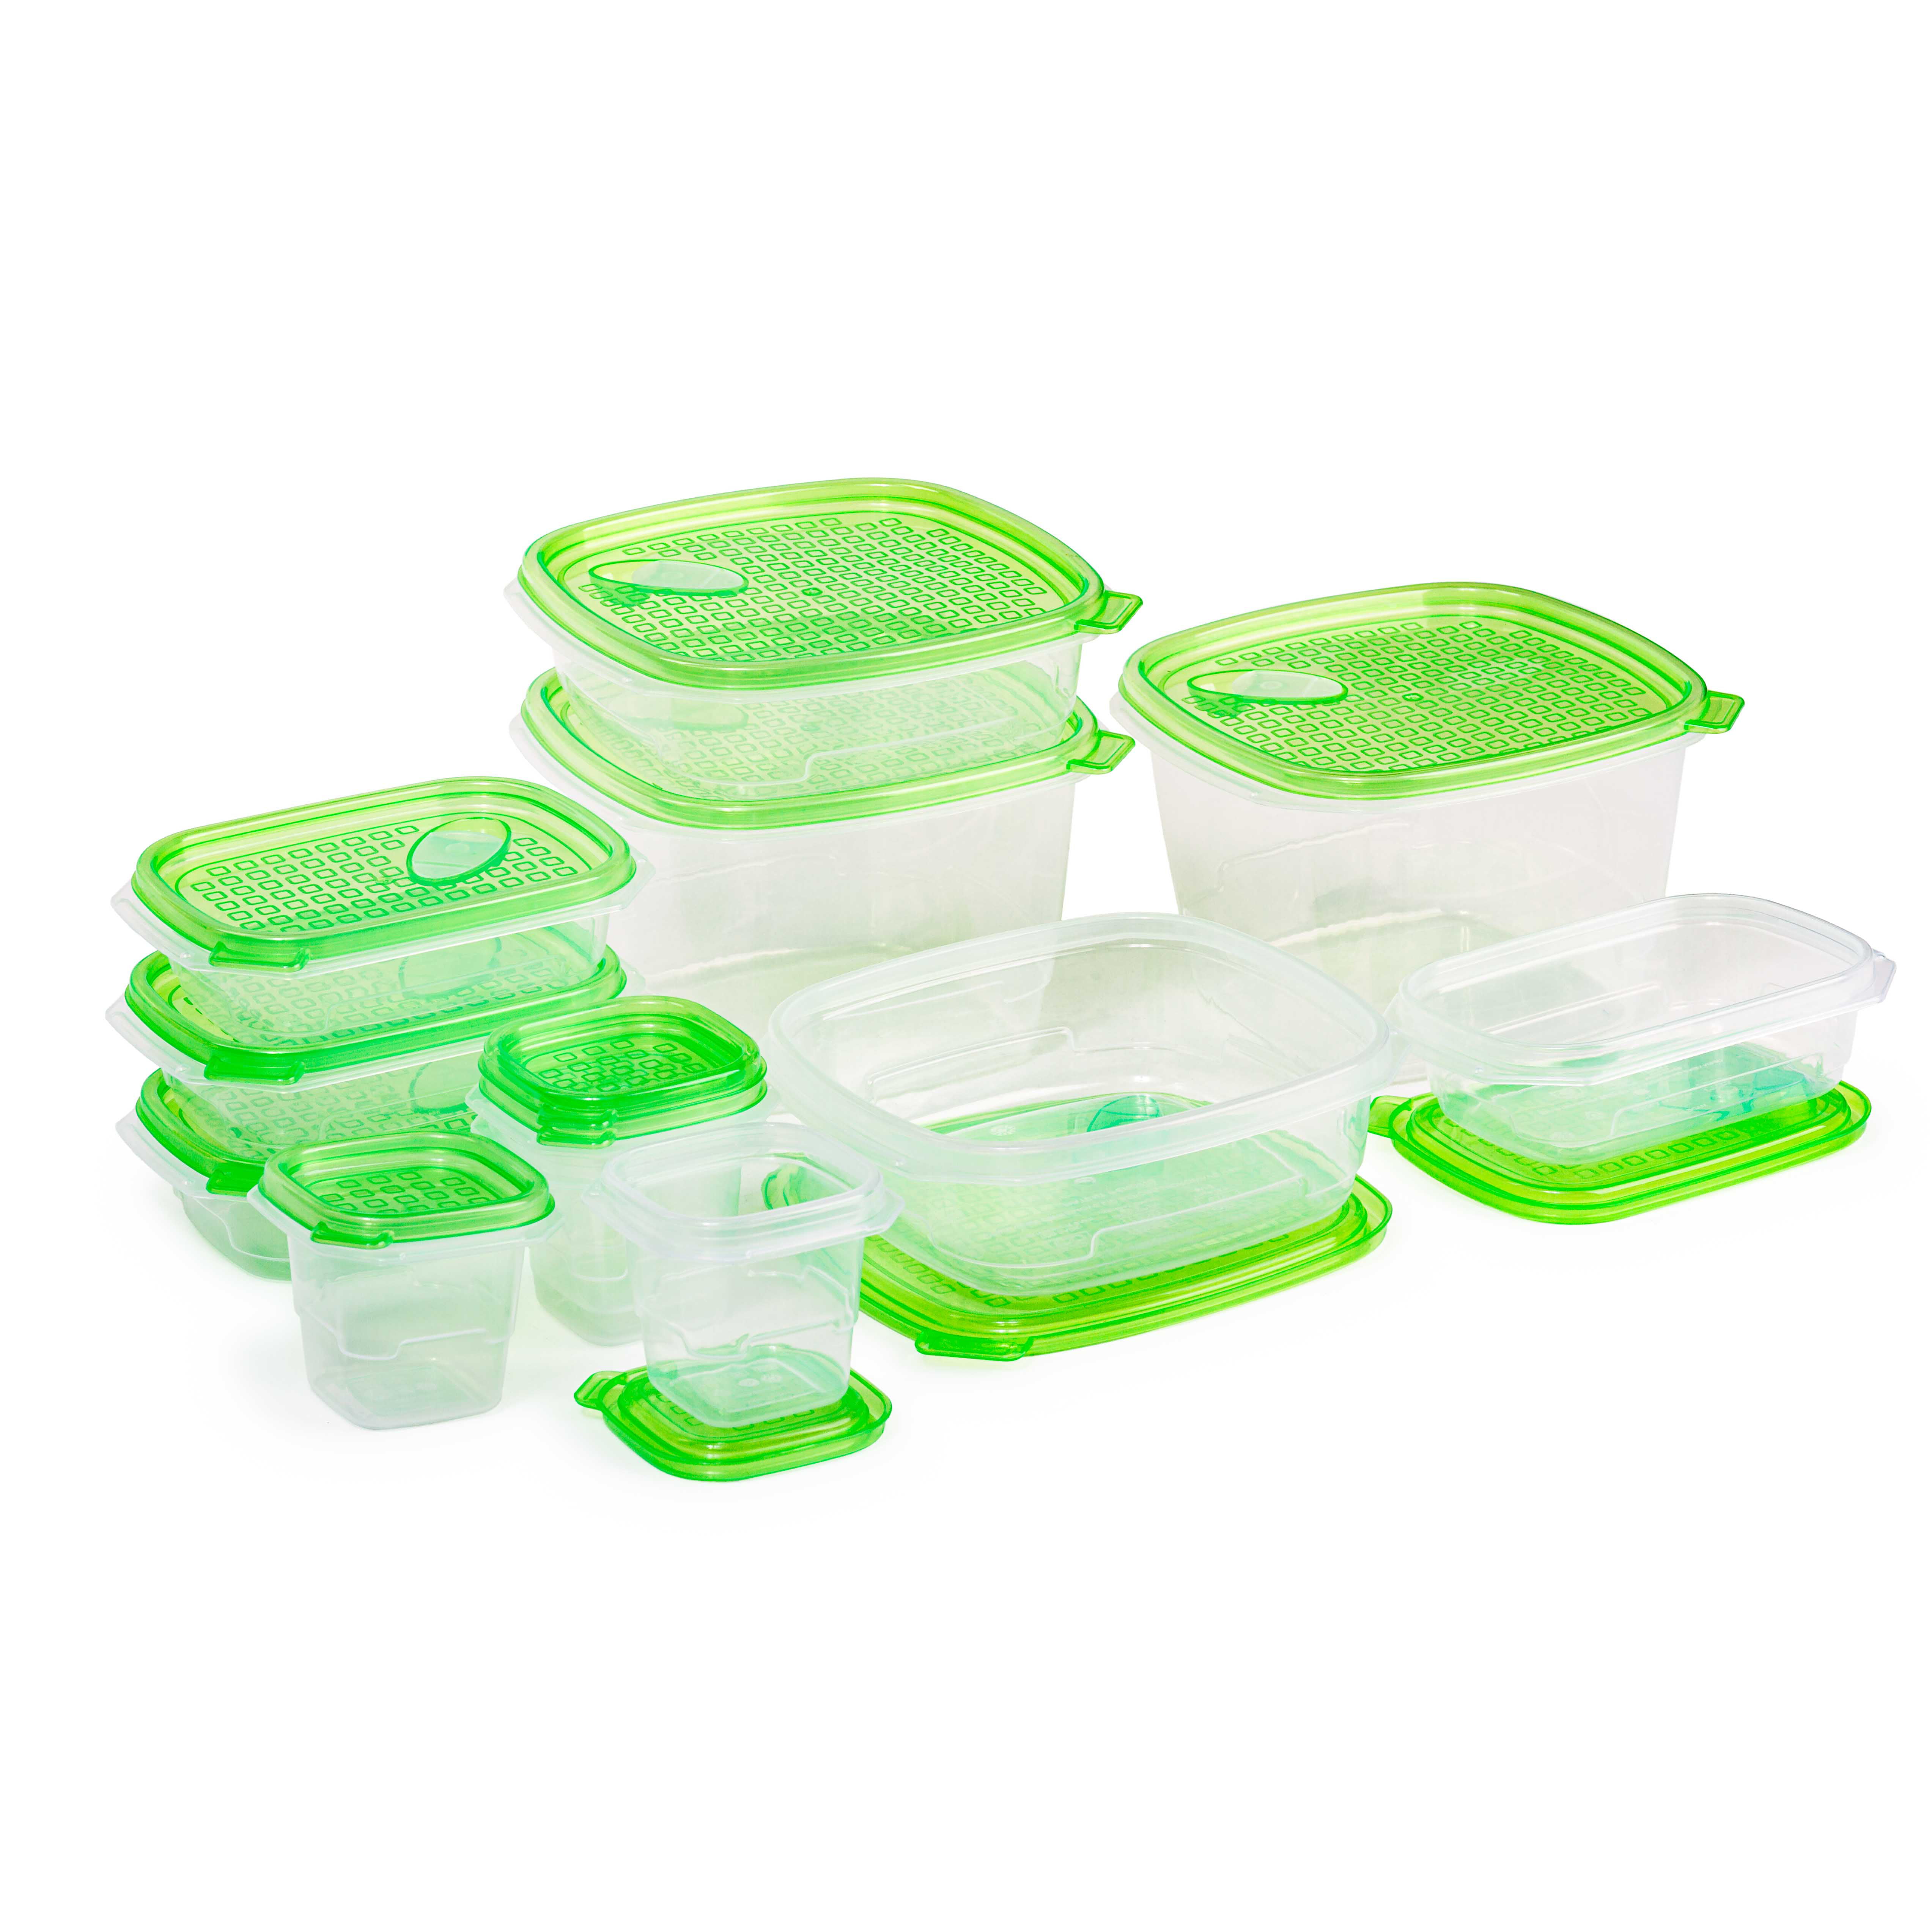 Lexi Home Nested Glass Meal Prep 4 Piece Oven Safe Food Storage Container Set, Green